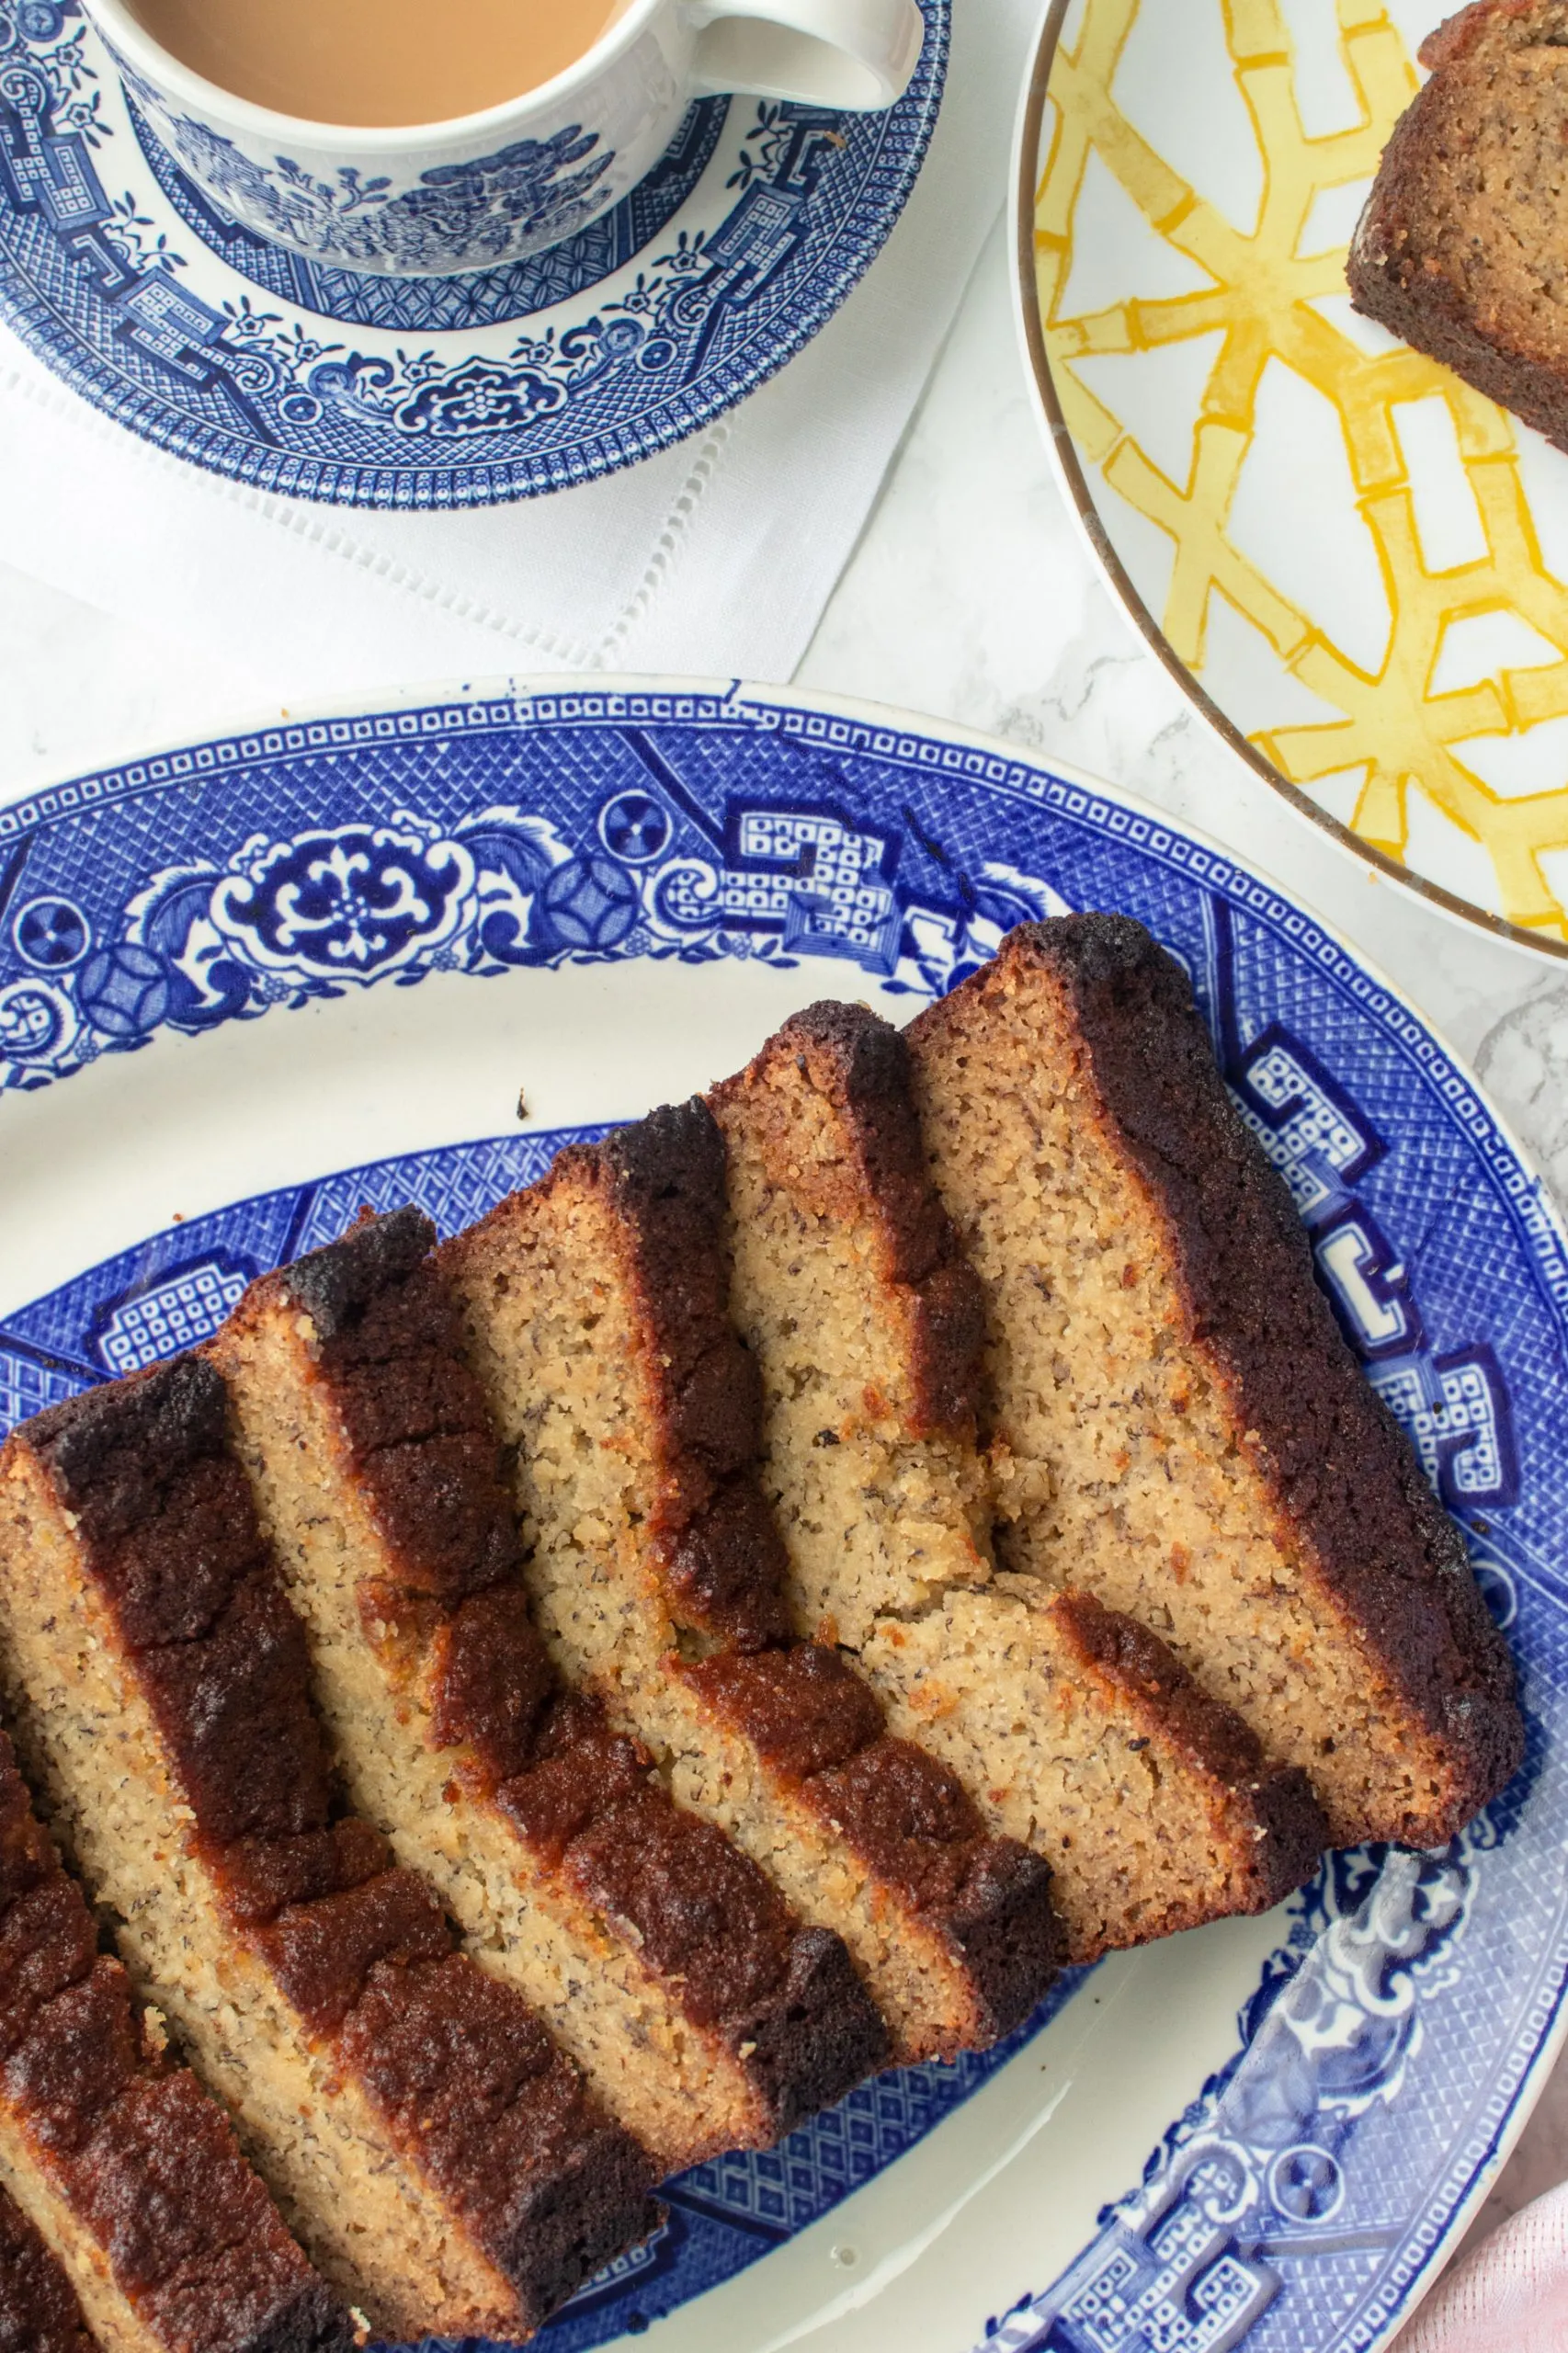 Gluten free banana bread made with real bananas is clean, healthy, and tastes just like the your odl favorite recipe minus the carbs and sugar.